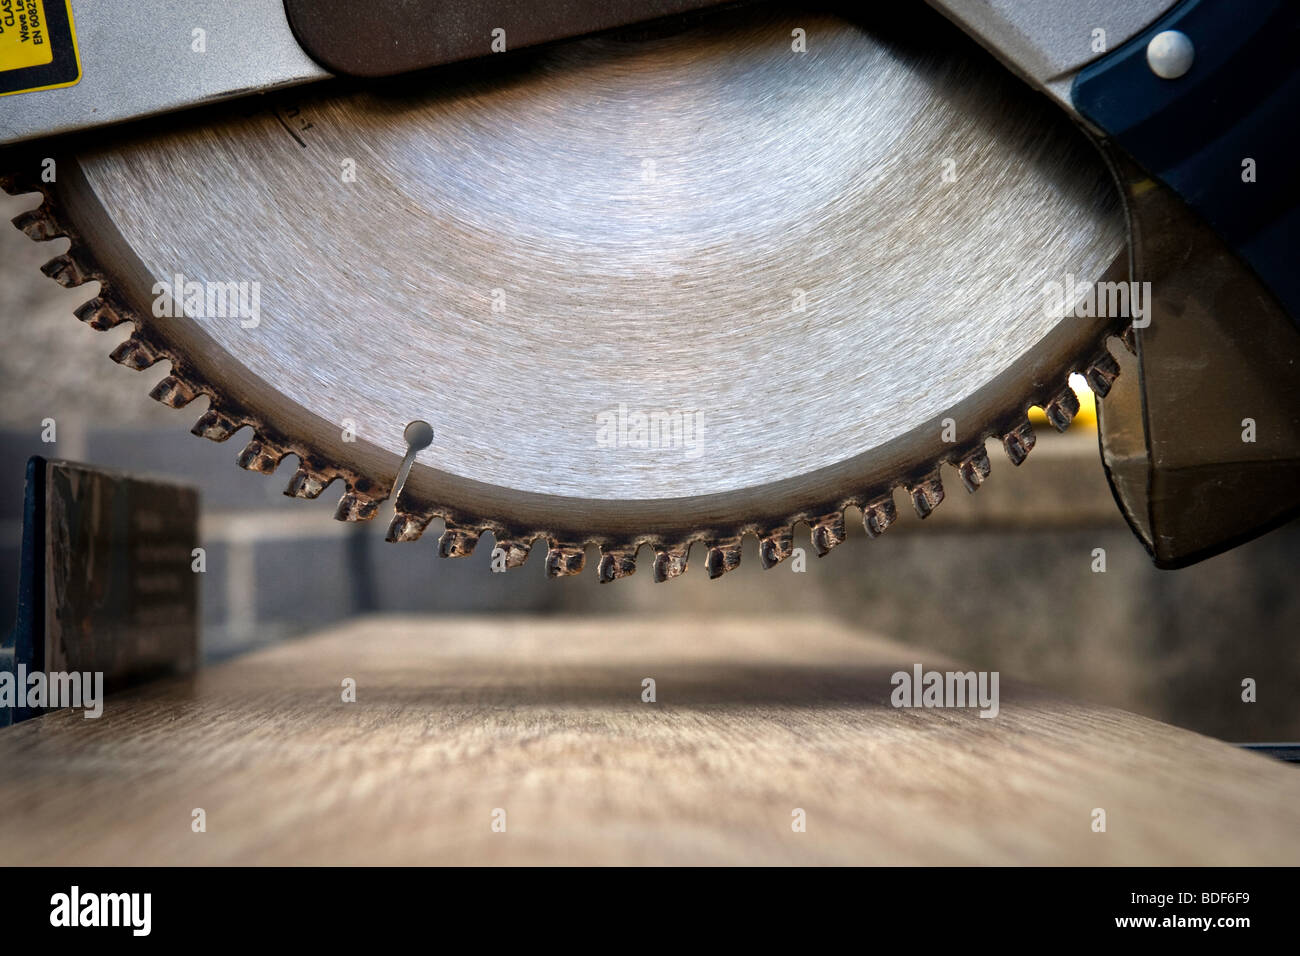 A view of a circular saw blade about to cut a piece of wood Stock Photo